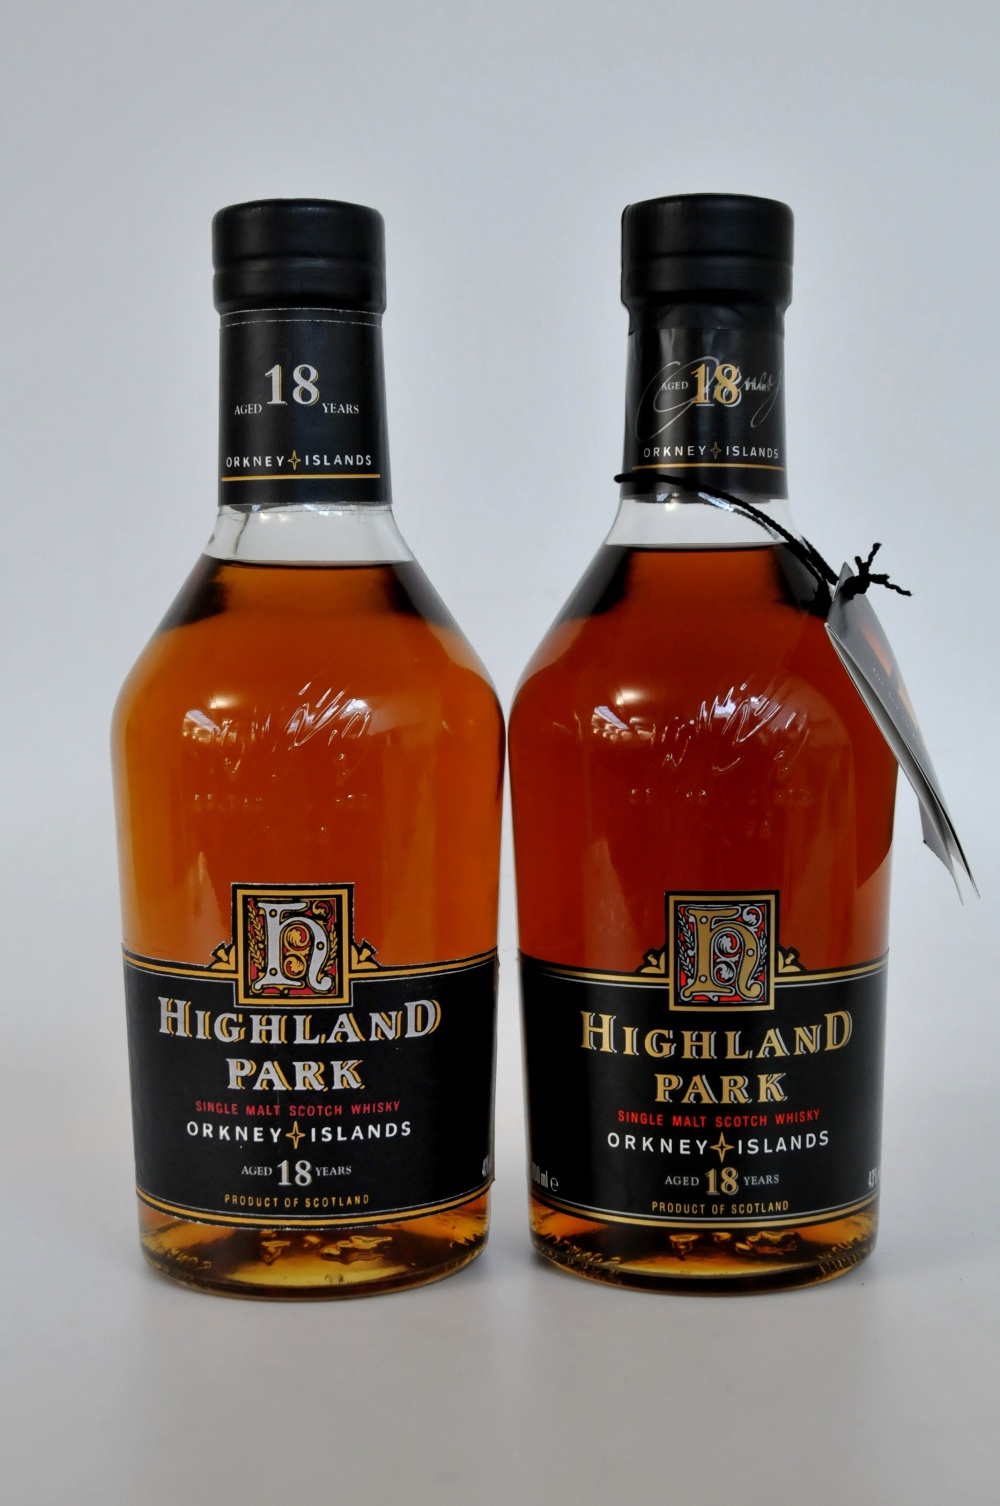 TWO HIGHLAND PARK 18YO
2 bottles Highland Park 18yo OB circa 1990s. 1 later edition with gold text